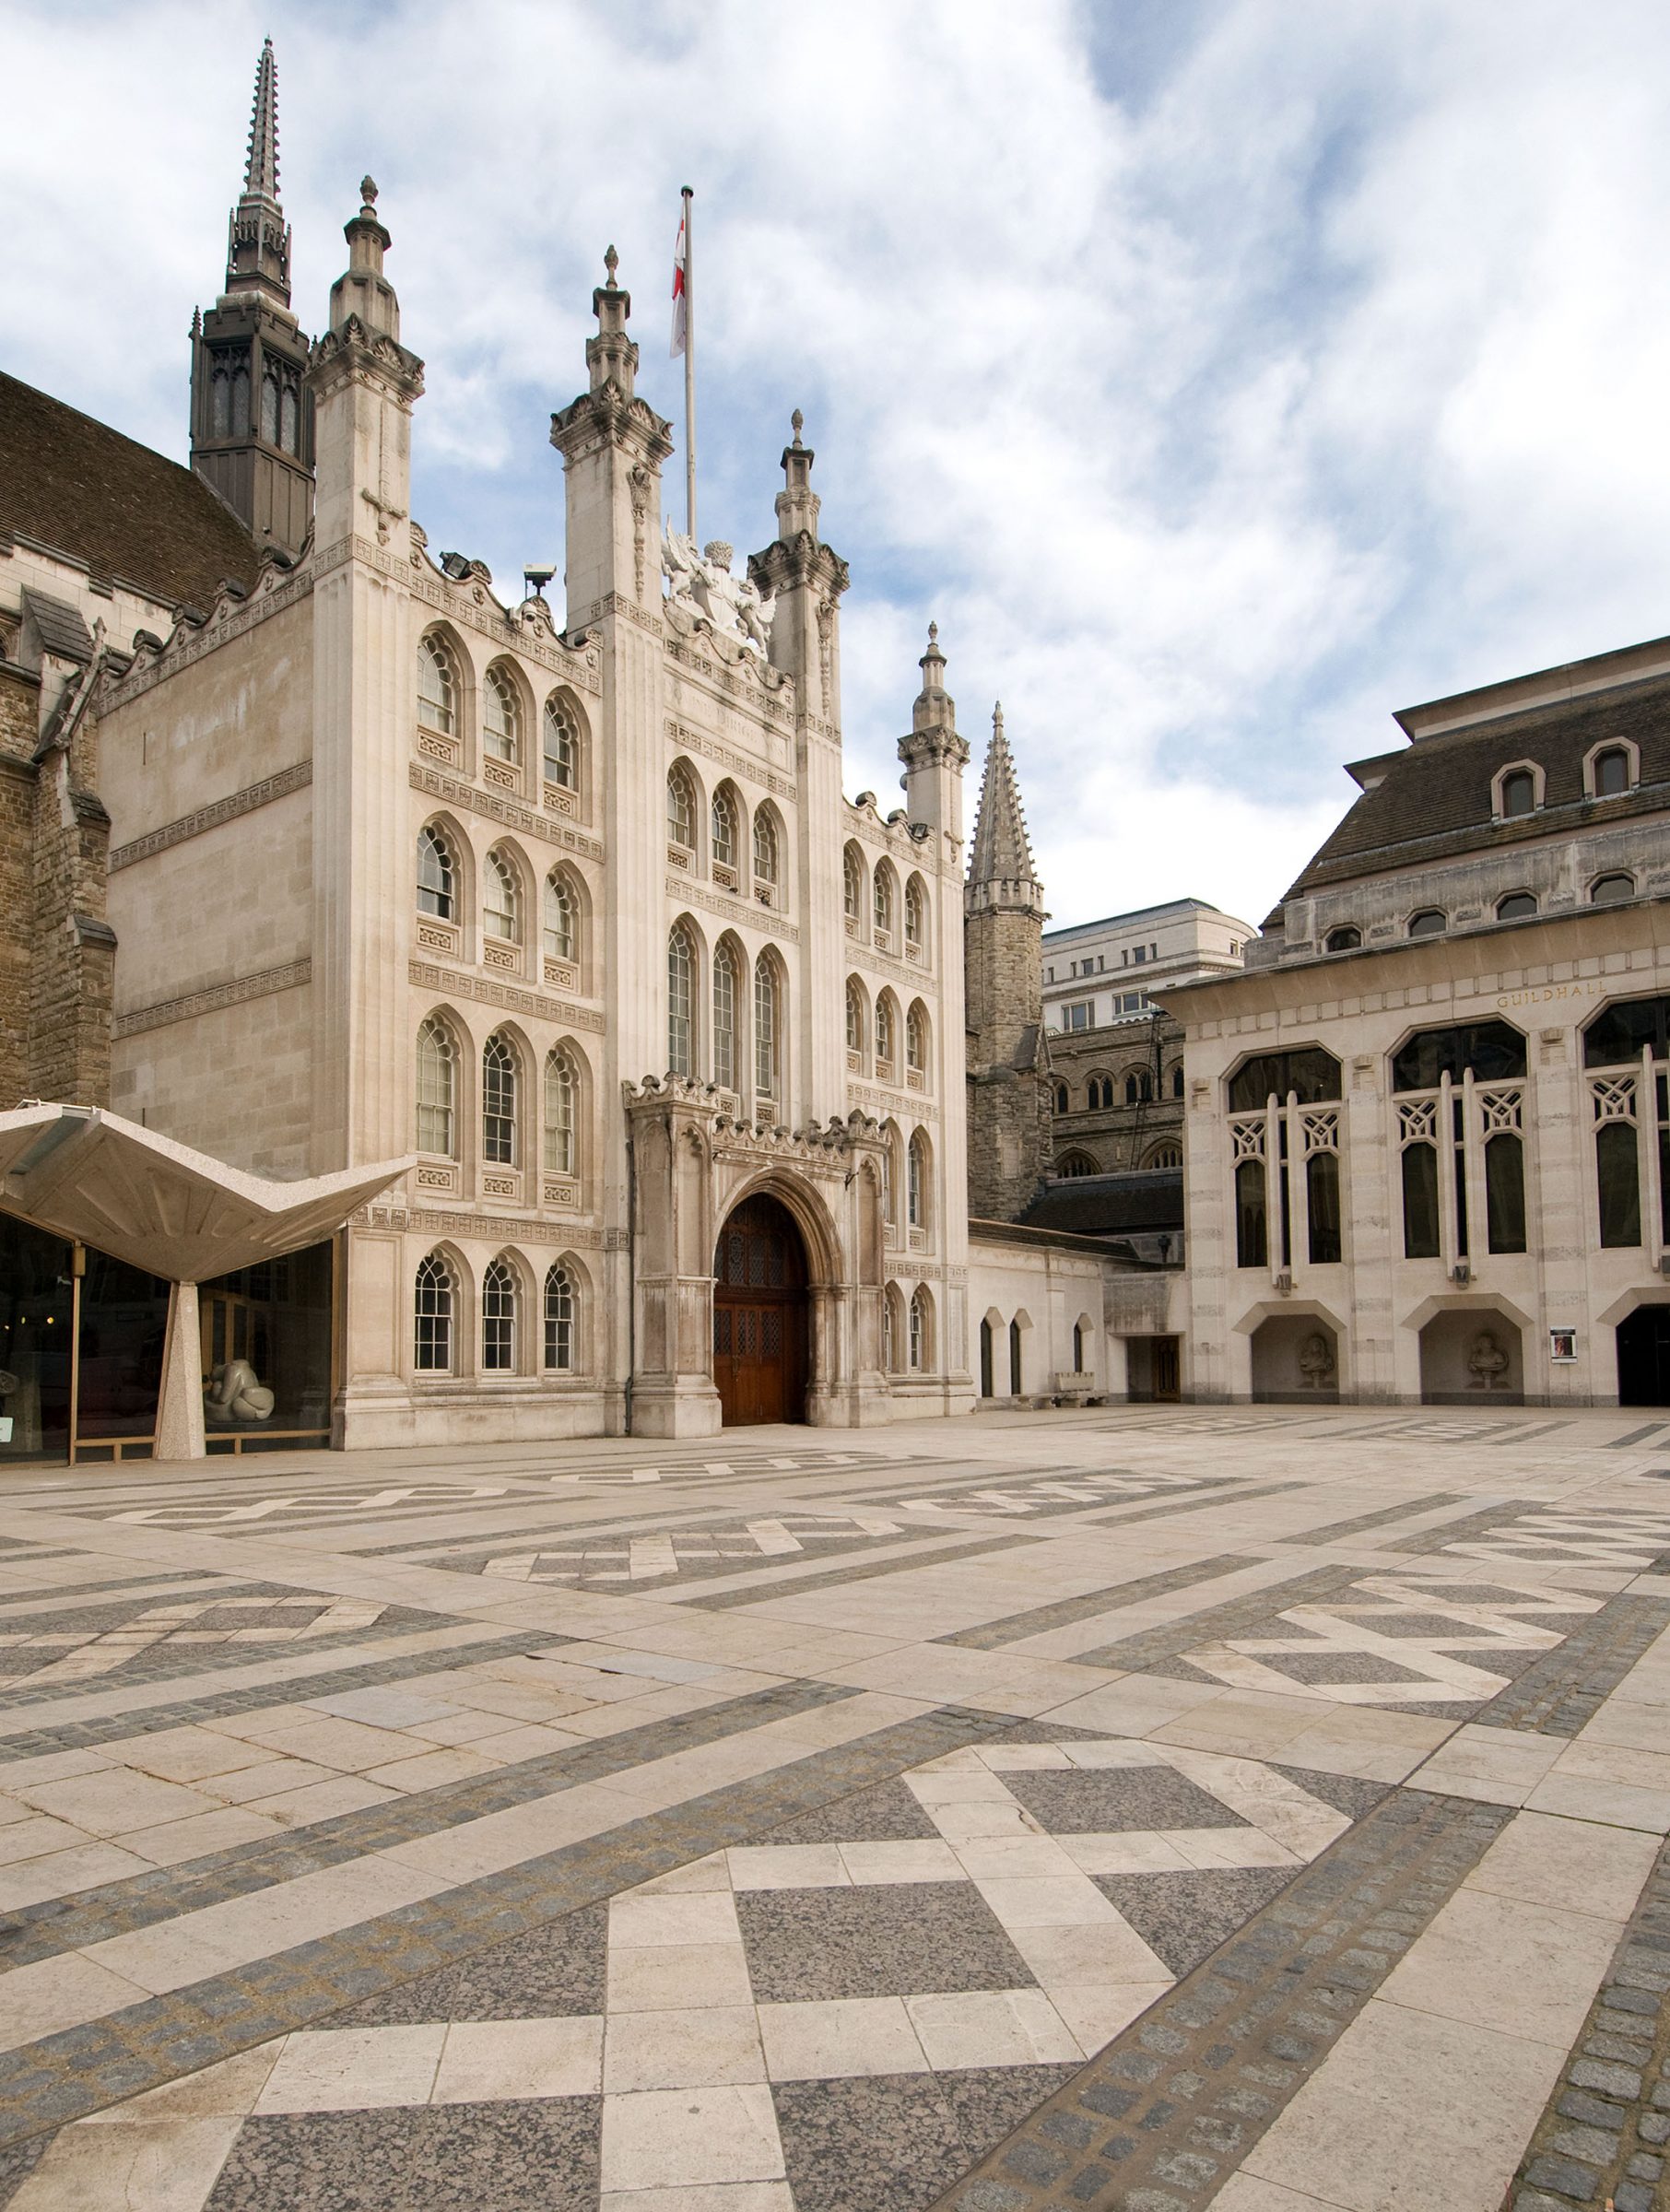 The London Guildhall